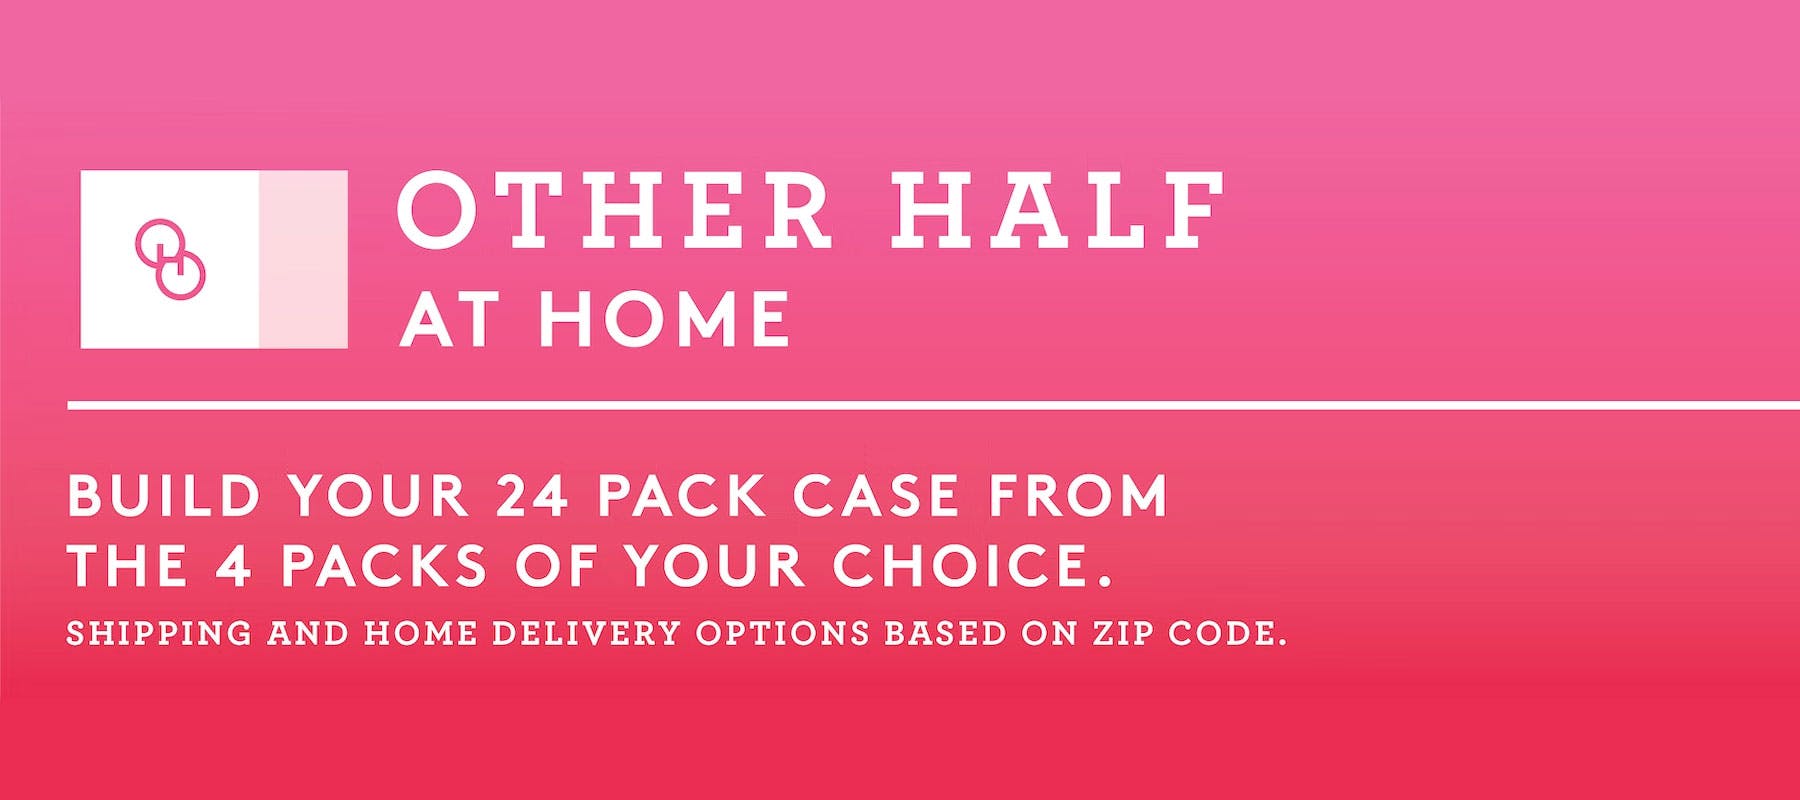 Other Half At Home - Build your 24 pack case from the 4 packs of your choice.